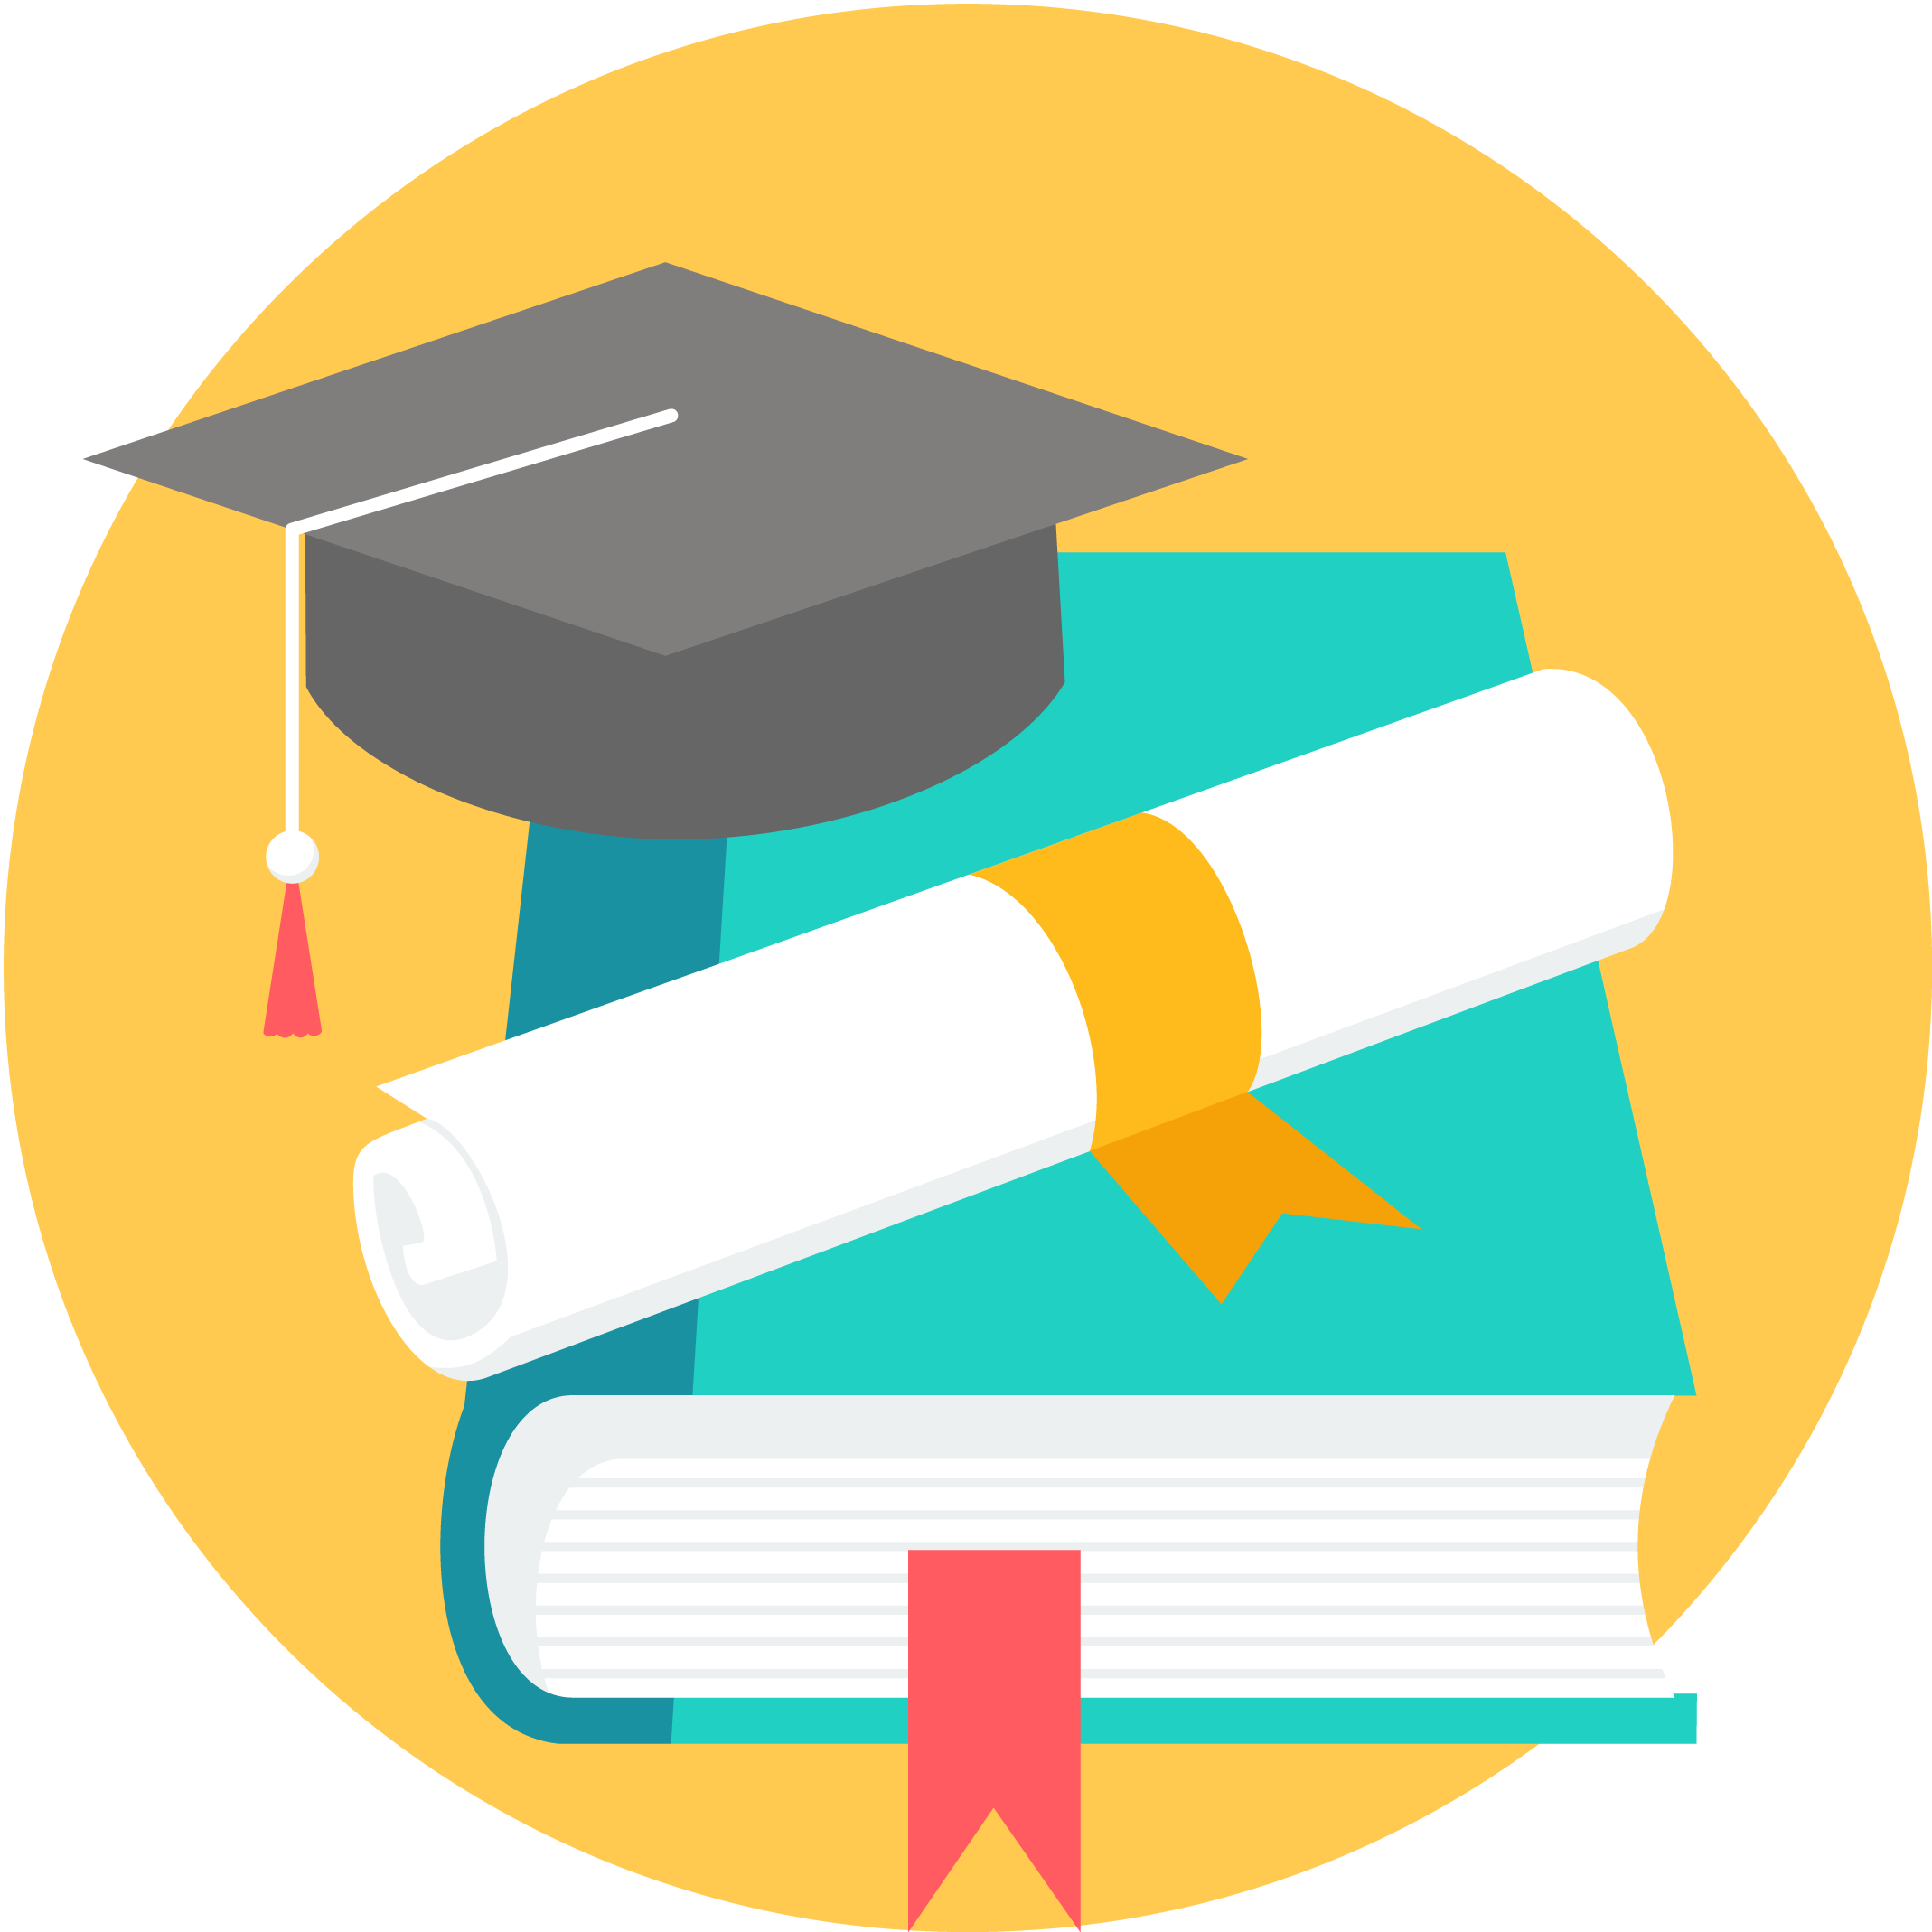 Diploma clipart scholarship. Edoctorweb seeks to assist